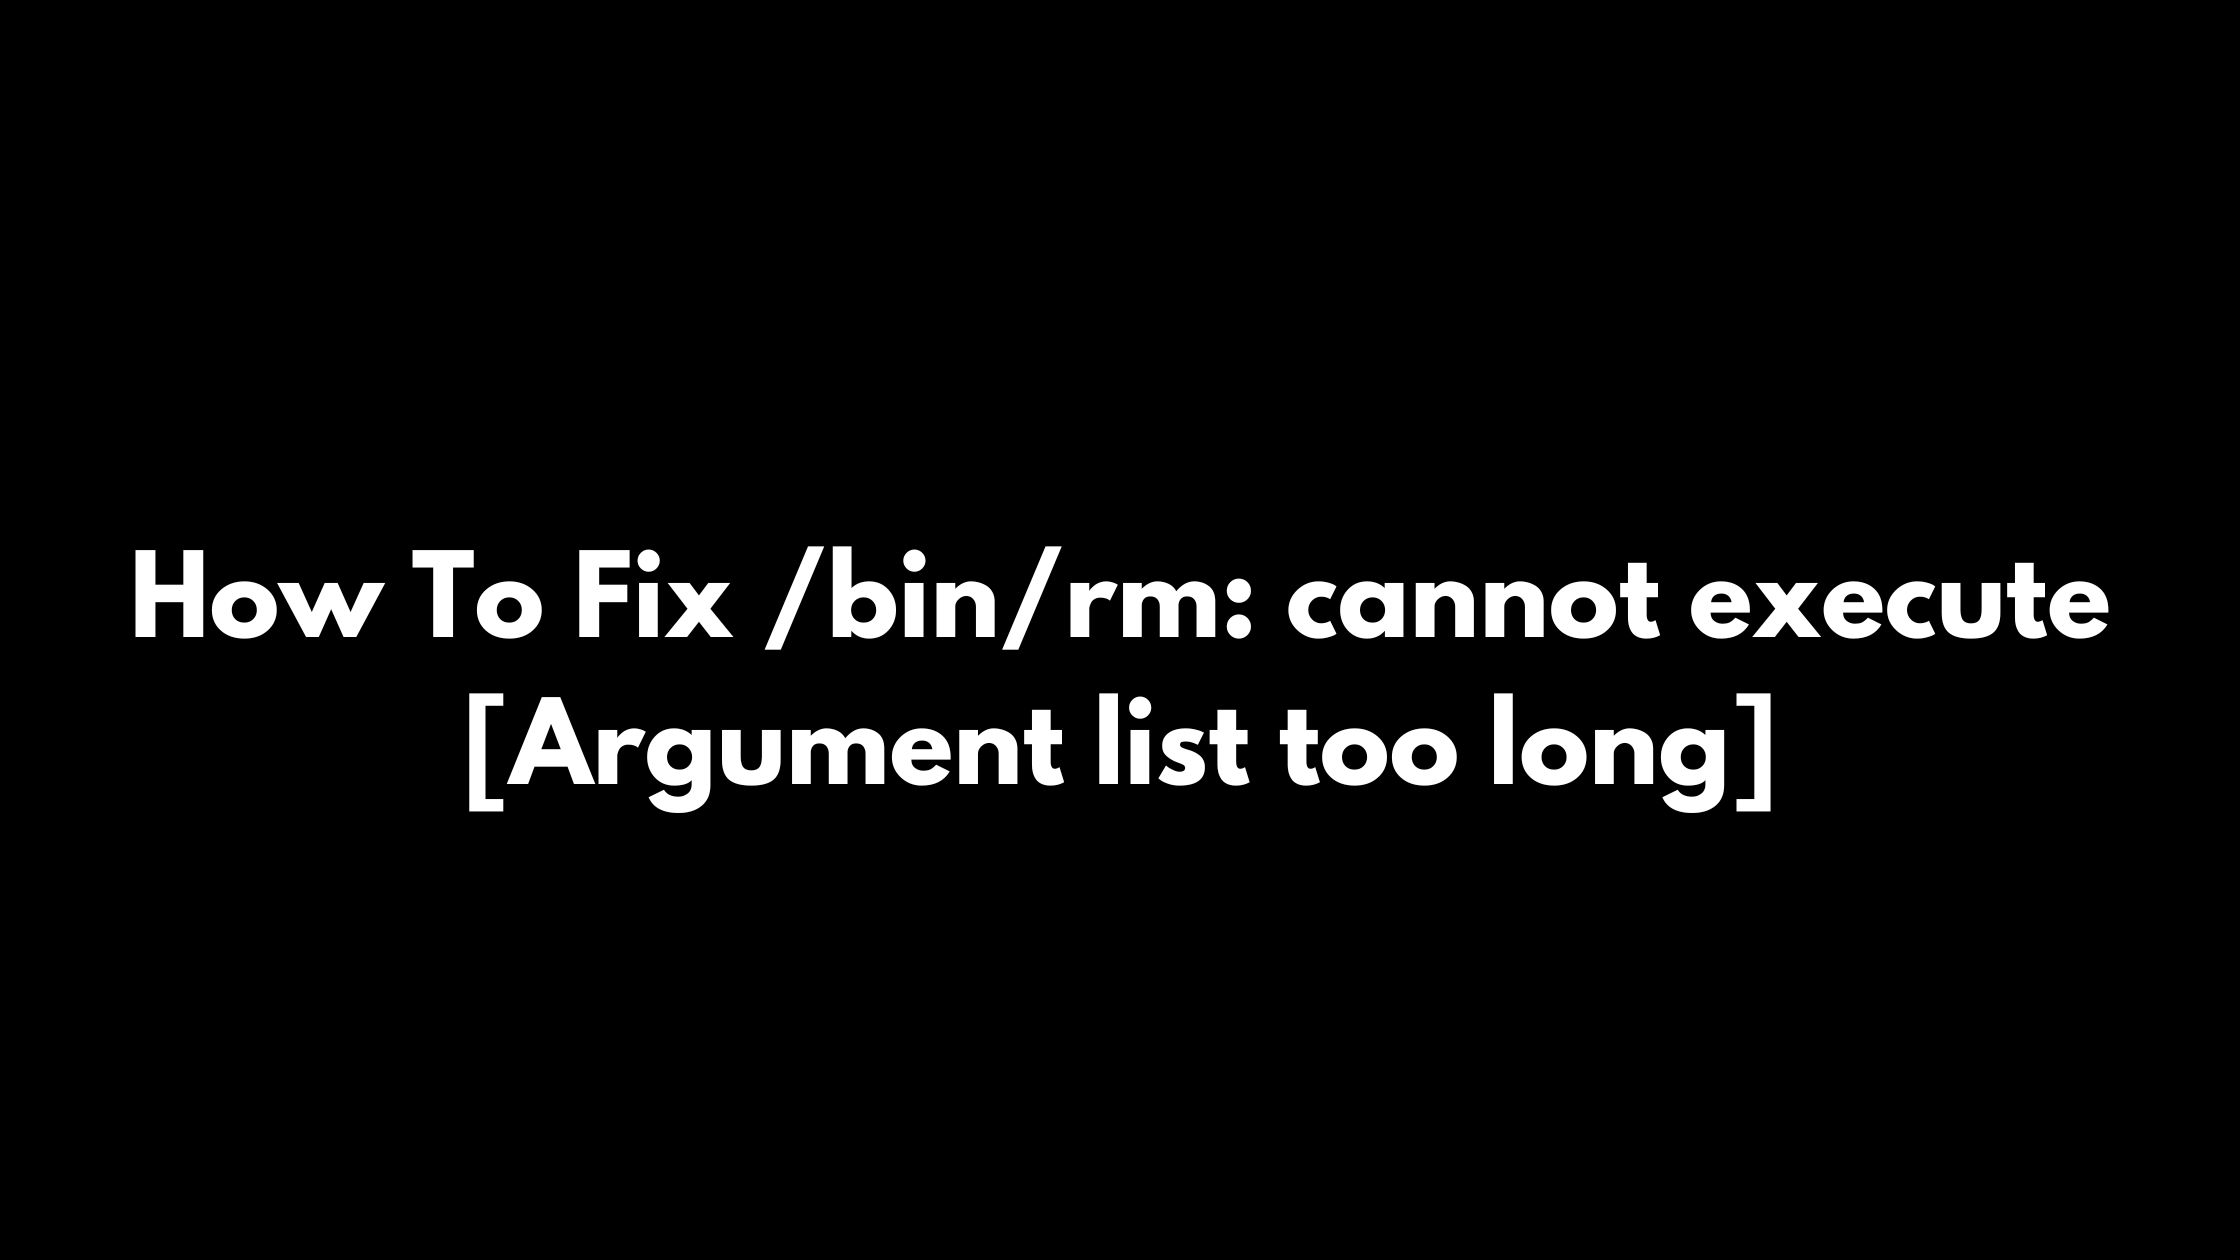 How To Fix /bin/rm: cannot execute [Argument list too long]